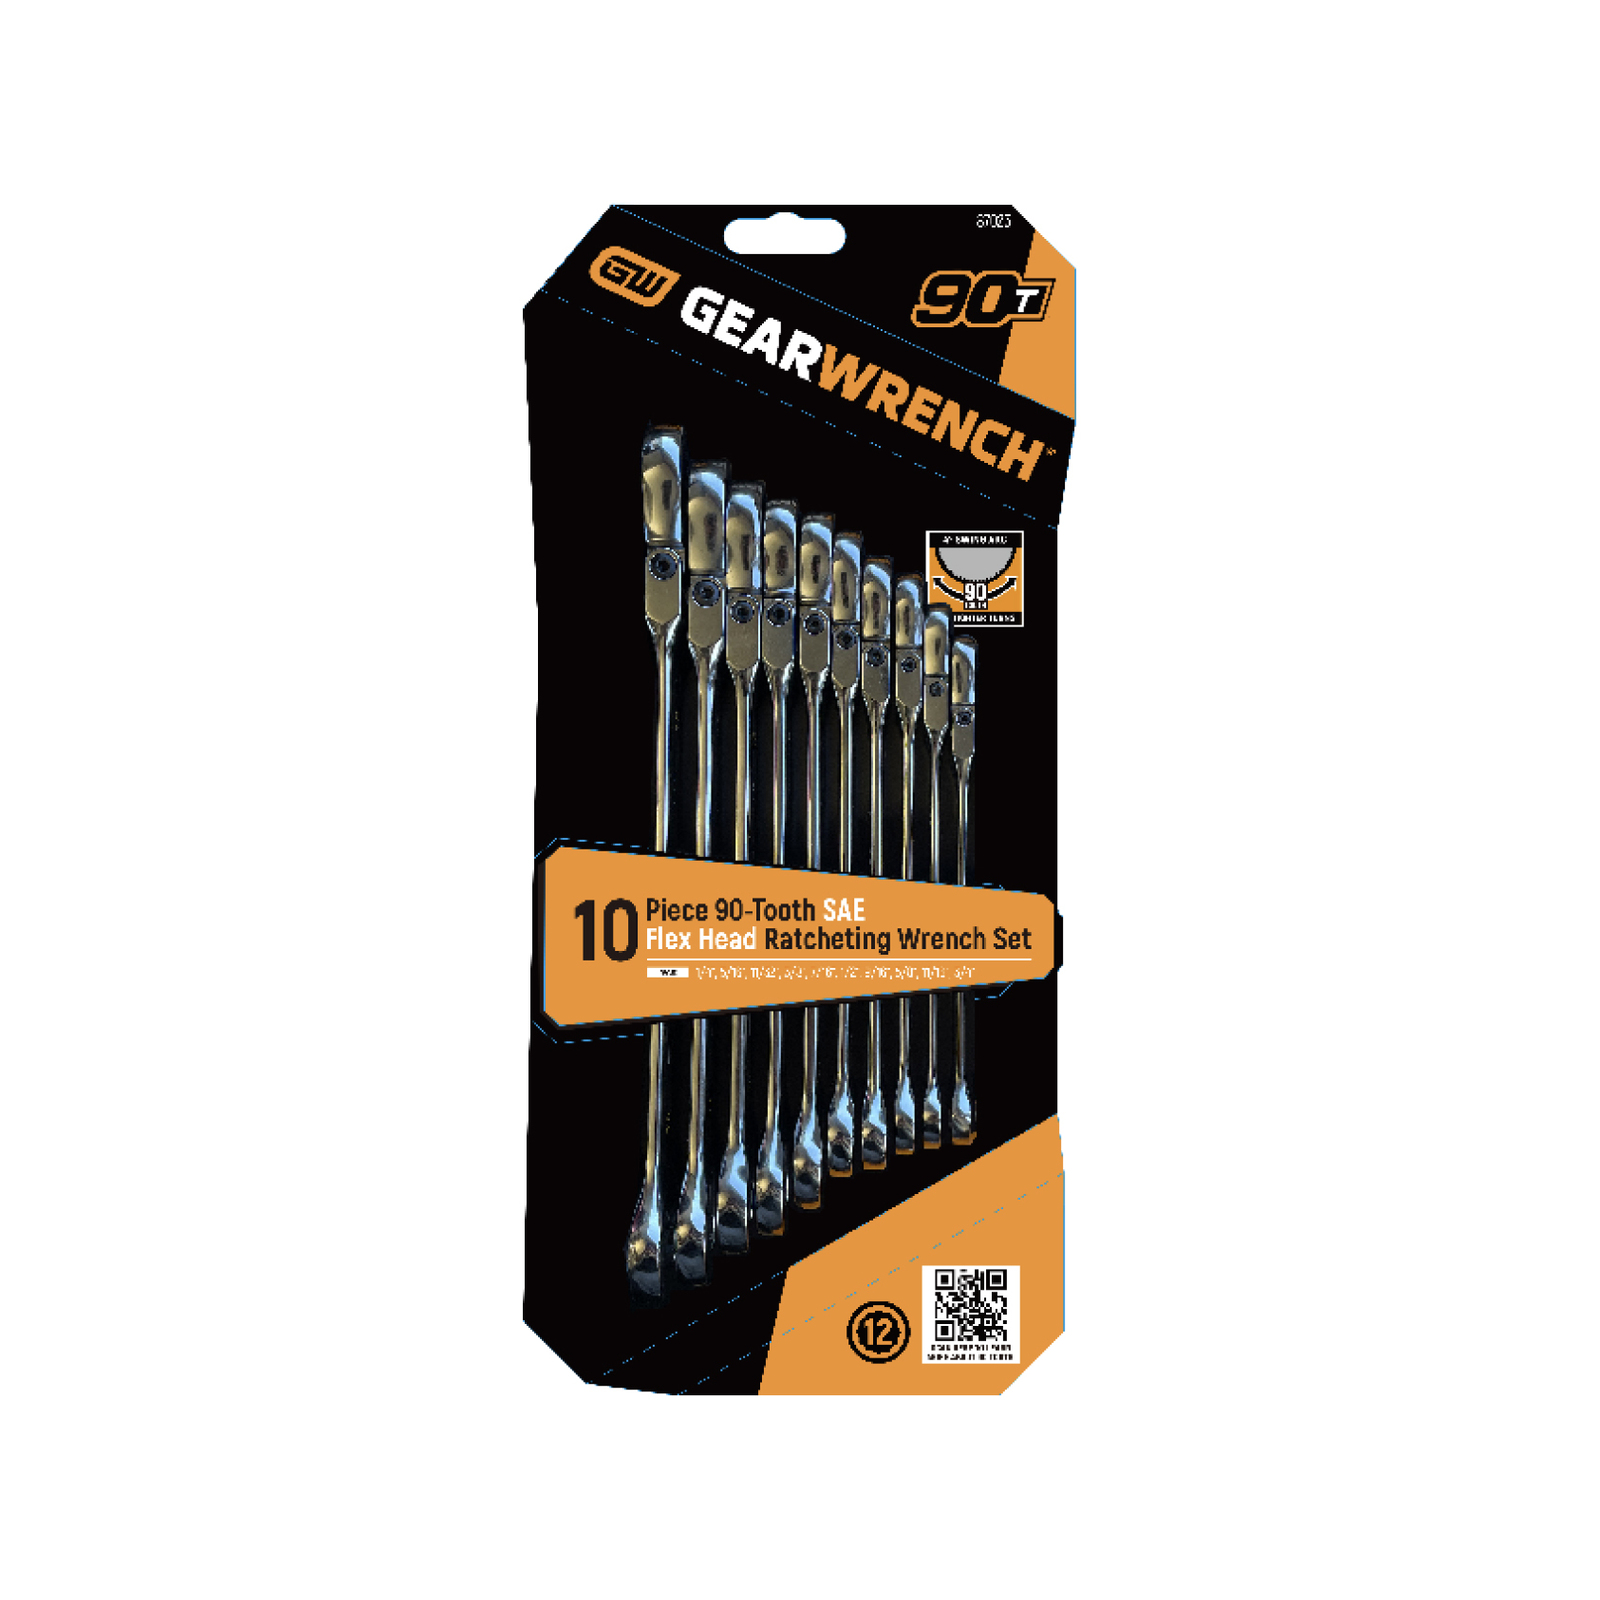 GEARWRENCH 10 Piece 90T 12PT SAE COMB Wrench Set Bunnings Australia